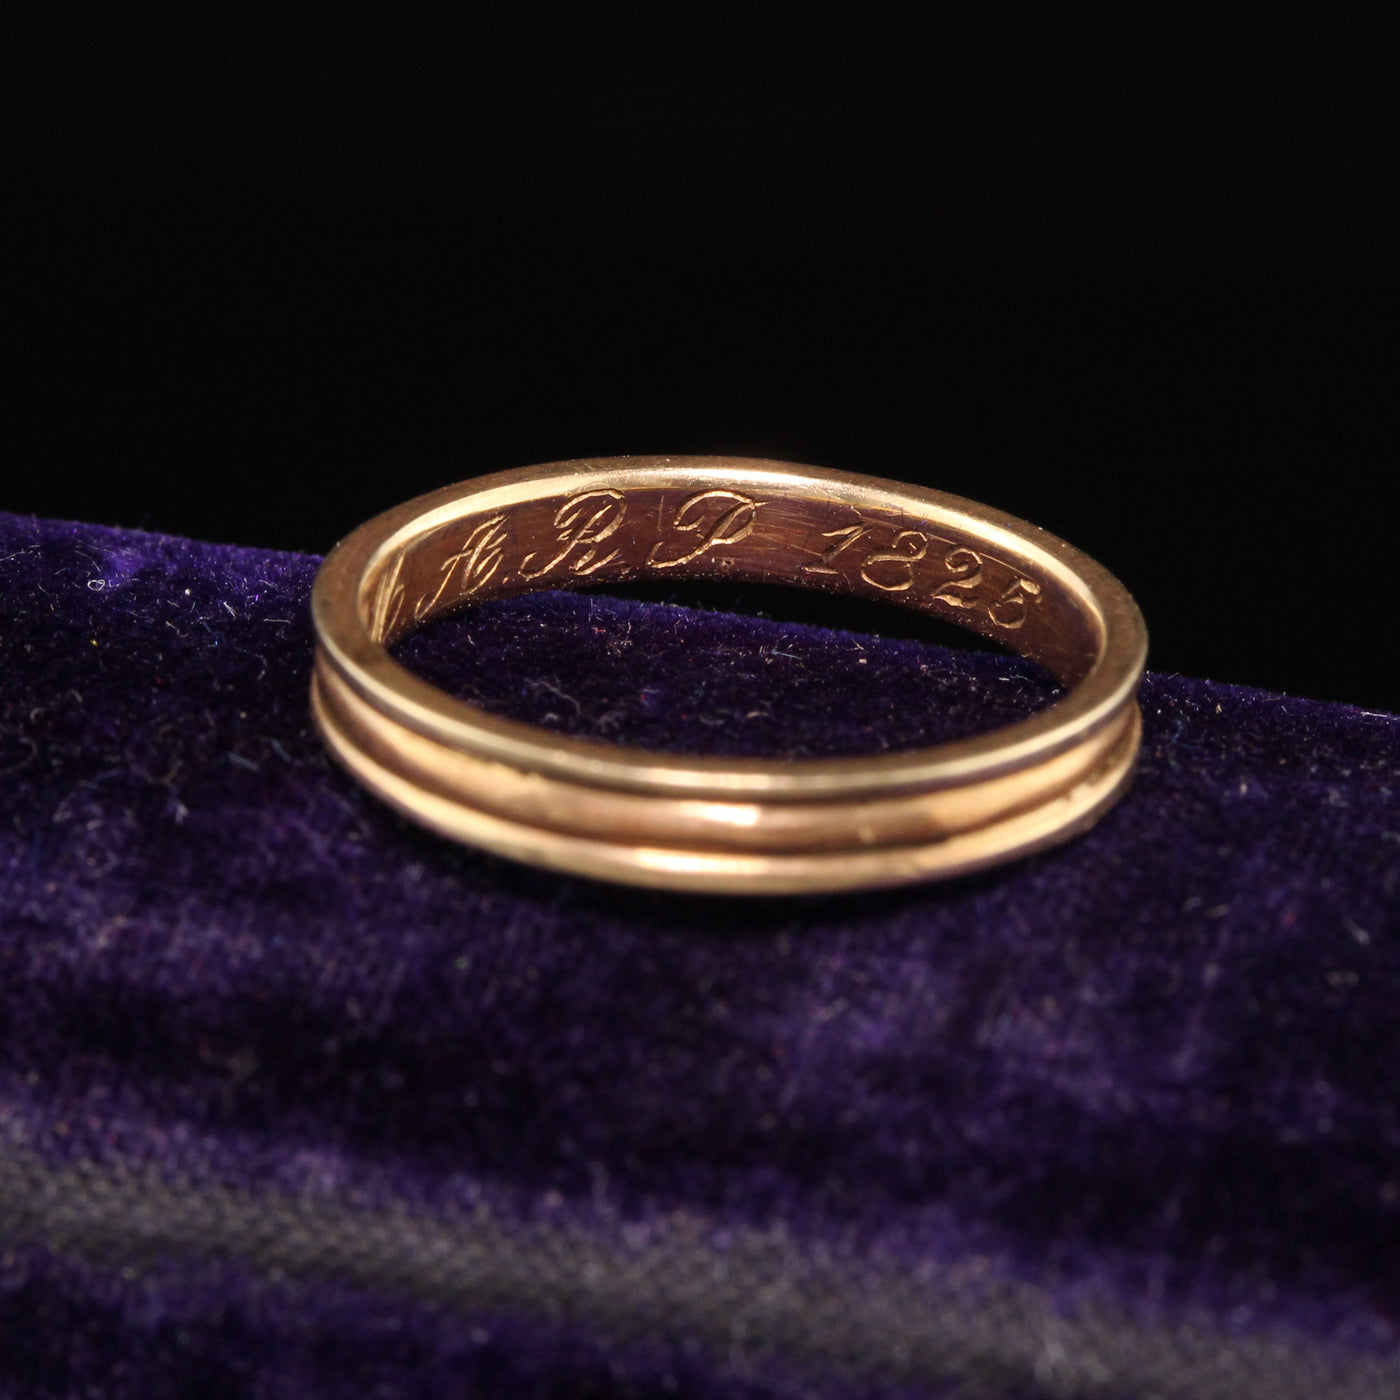 RESERVED - Layaway 1 of 5 - 30% deposit - Antique Victorian 14K Yellow Gold Engraved Wedding Band - Size 6